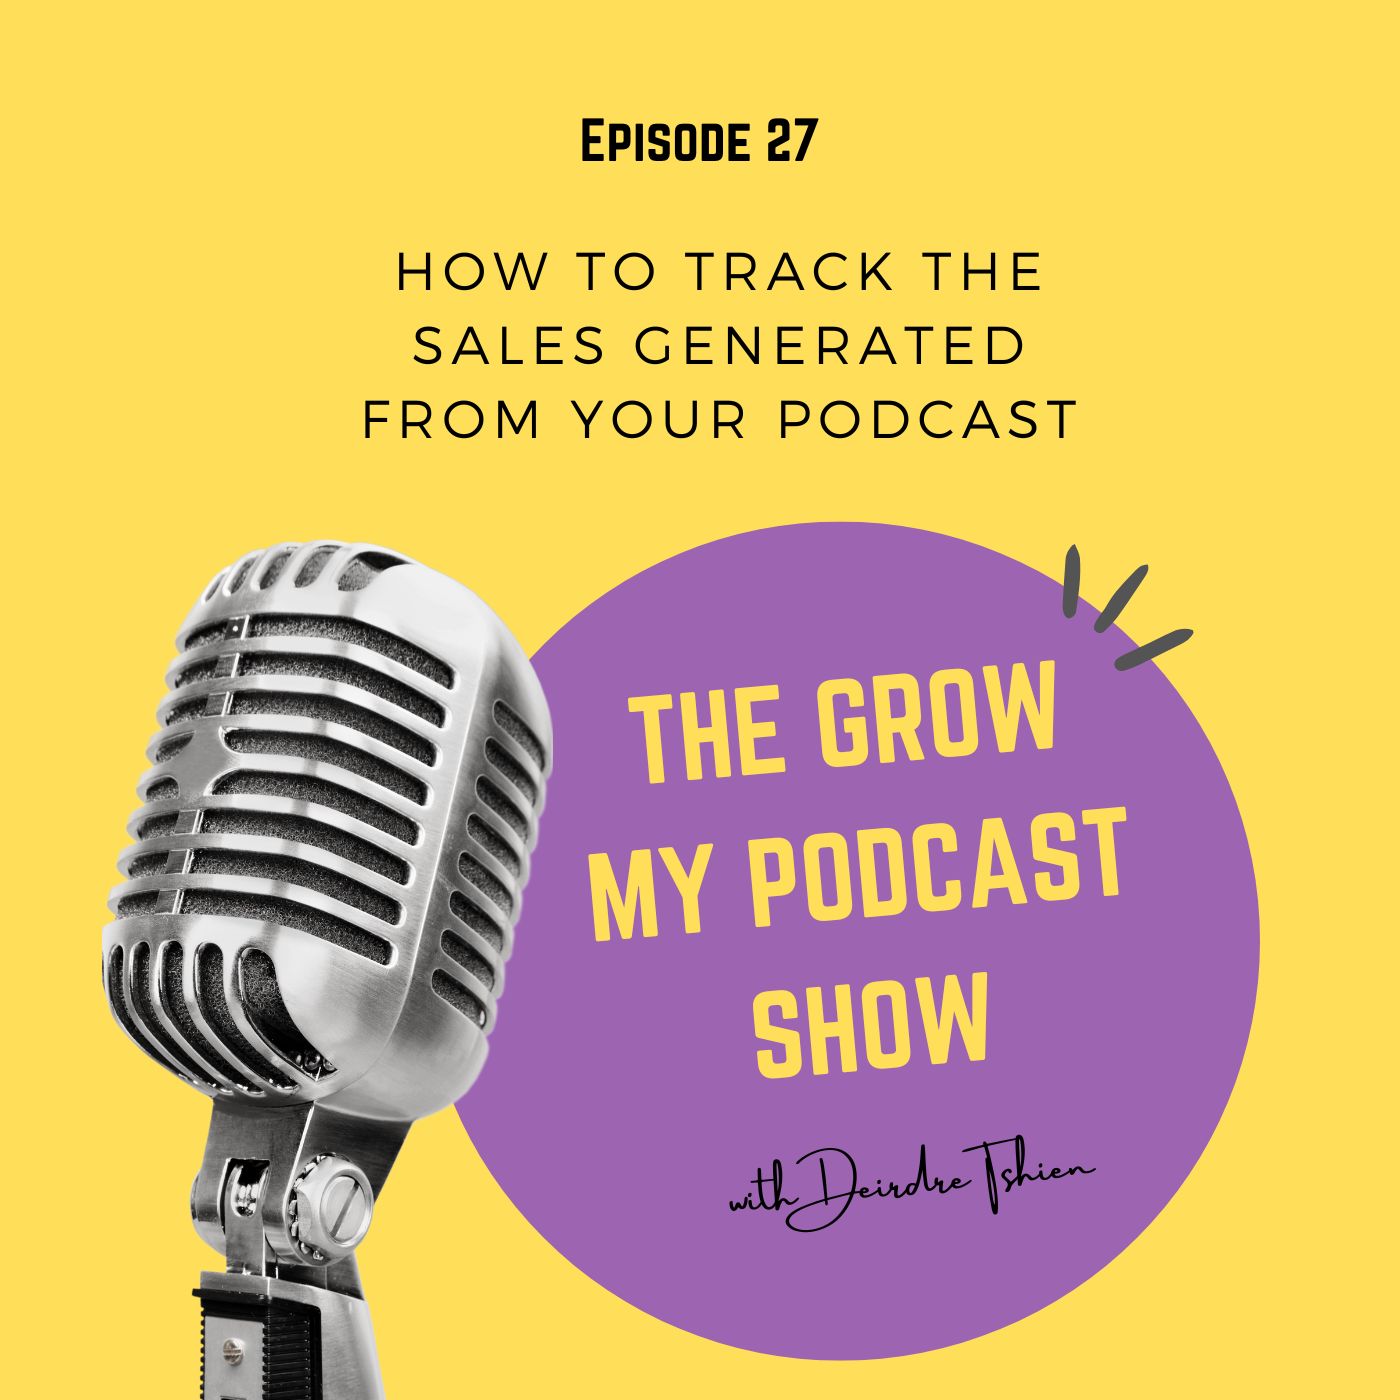 How to track the sales generated from your podcast